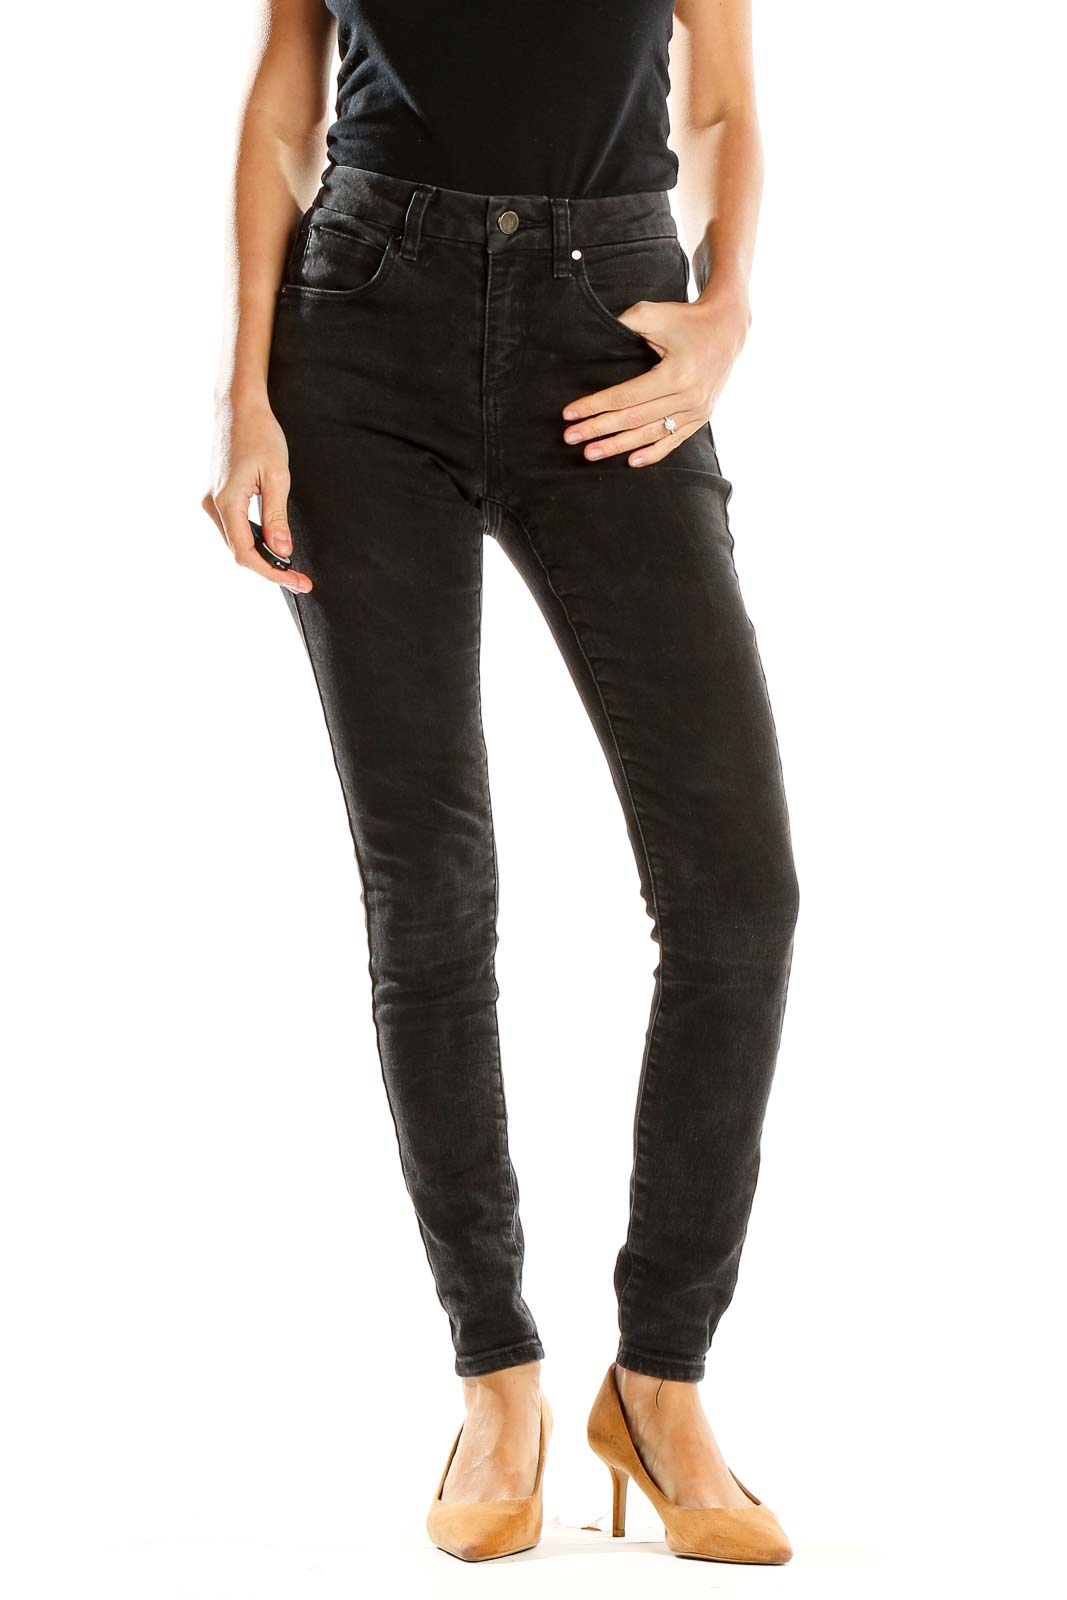 Black High Waisted Skinny Jeans Front